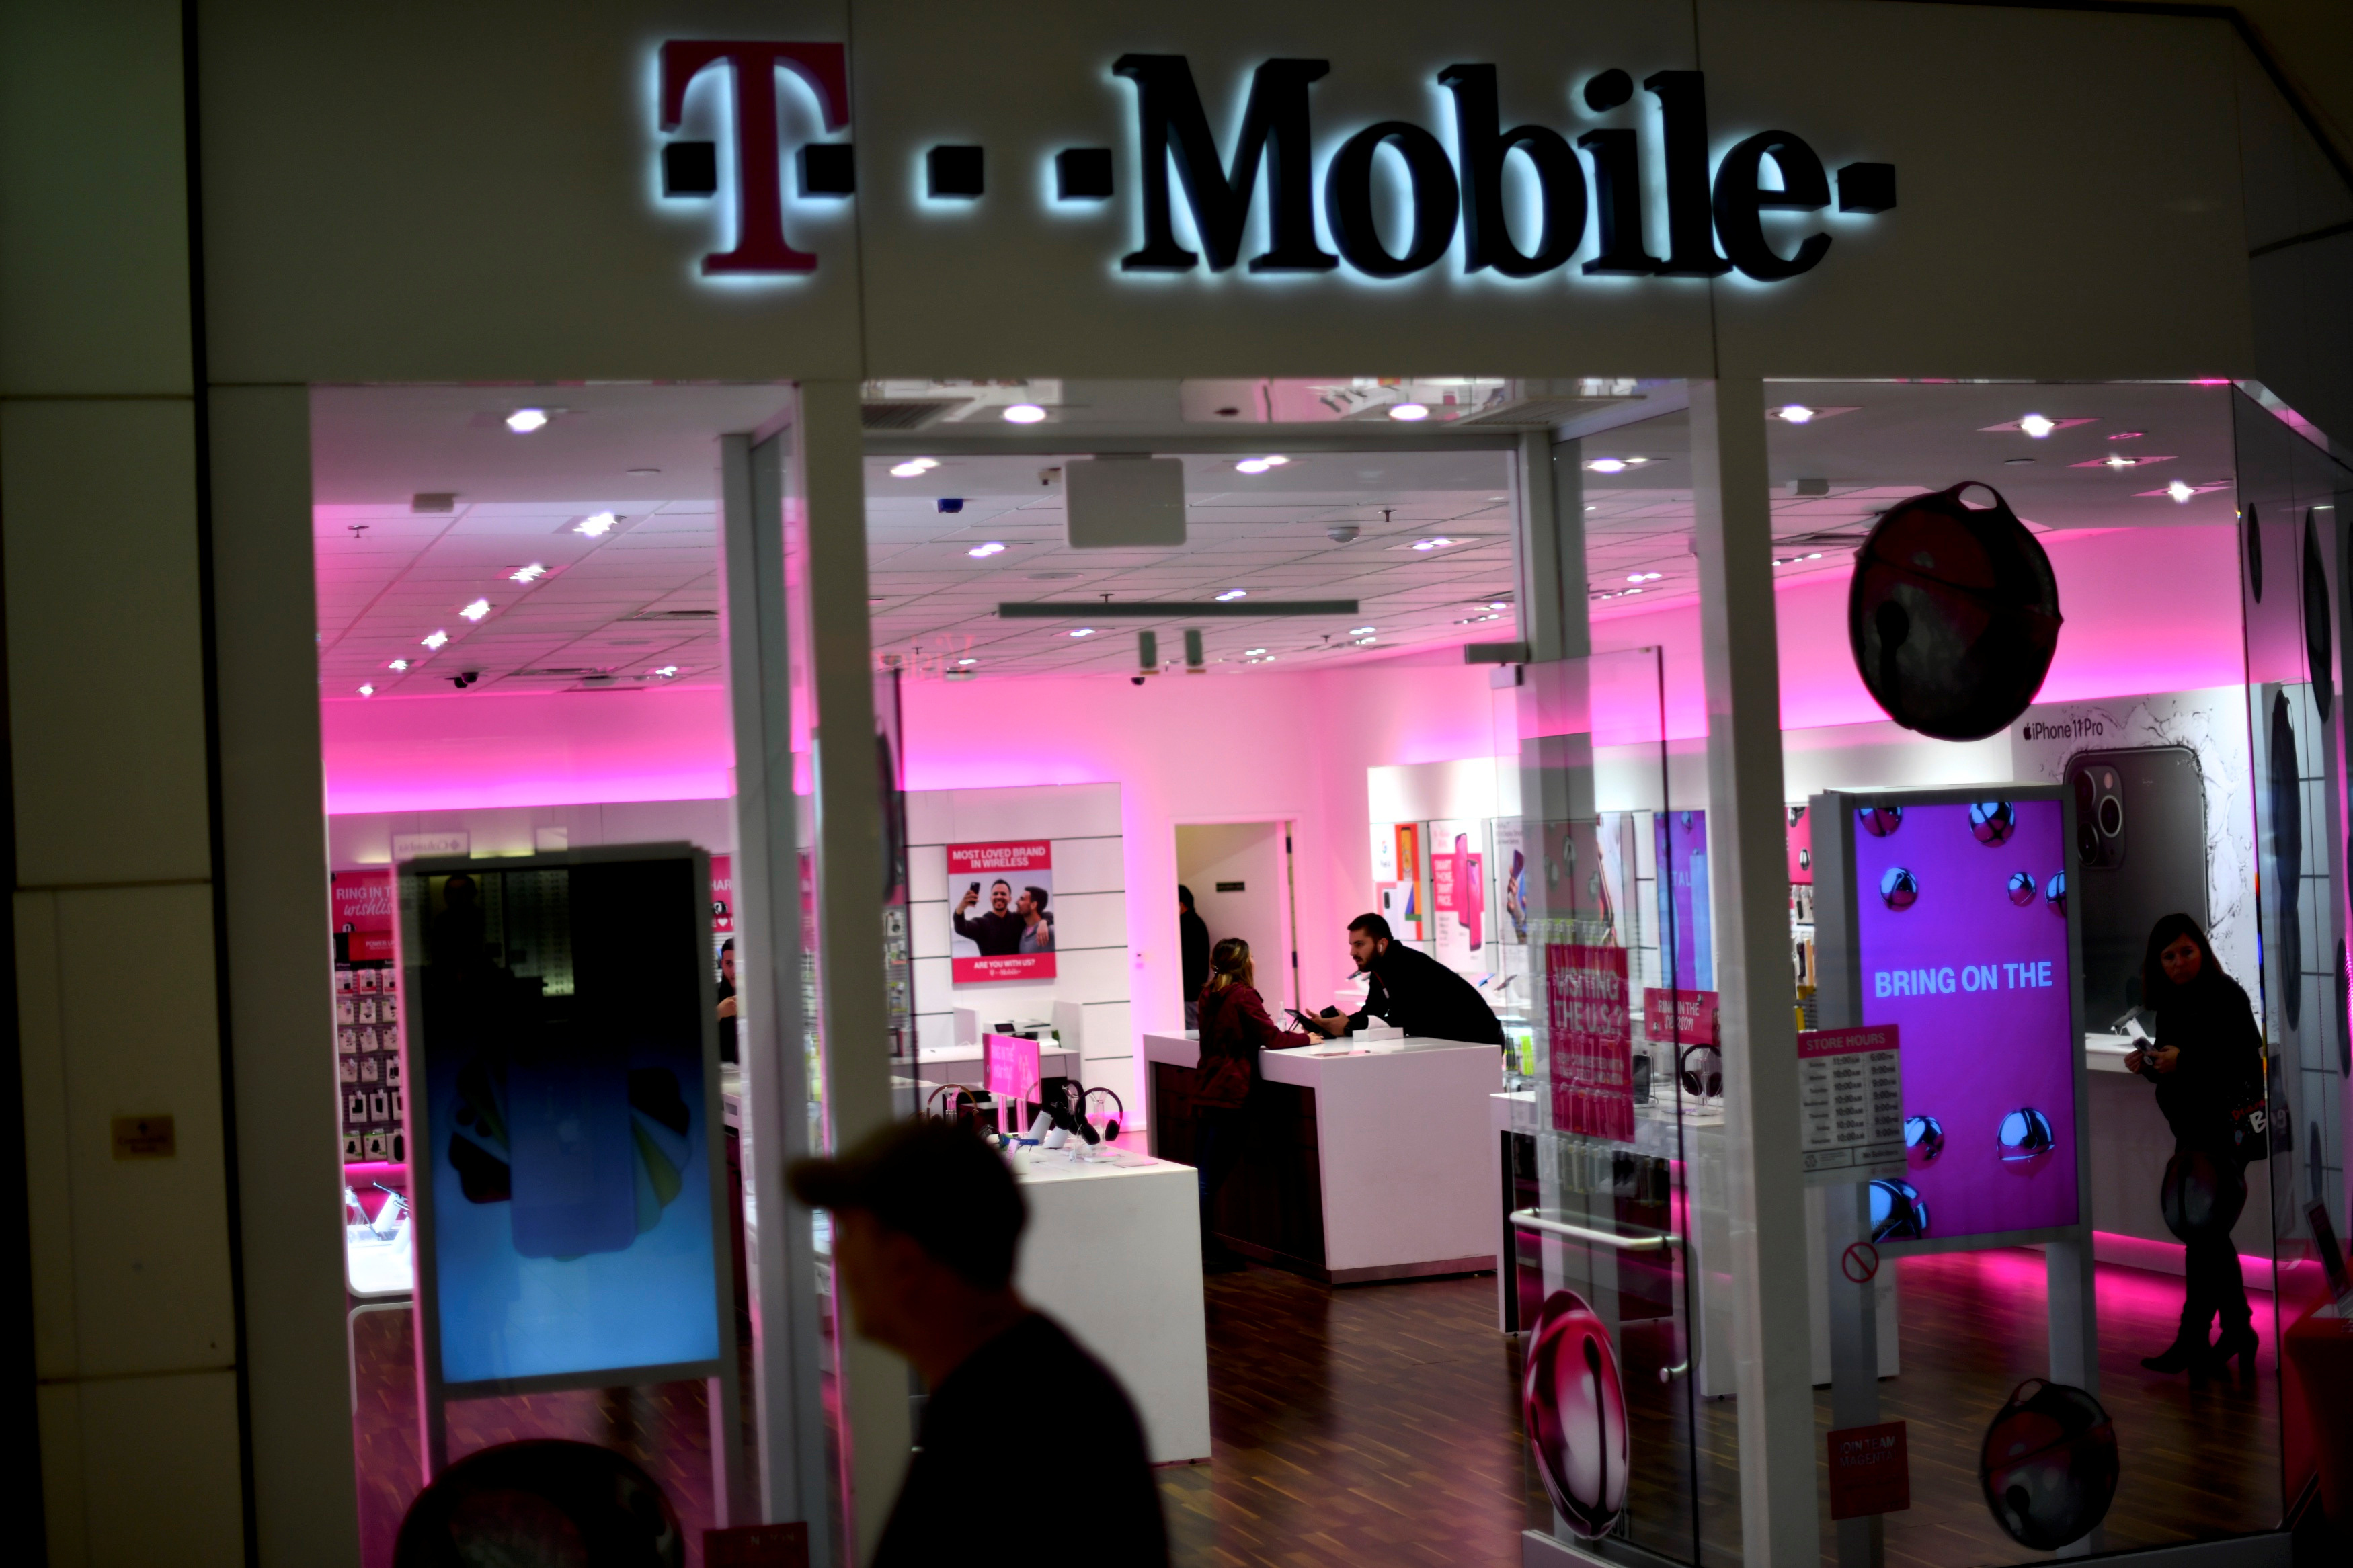 A T-Mobile employee assists a customer as holiday shopping accelerates at the King of Prussia Mall